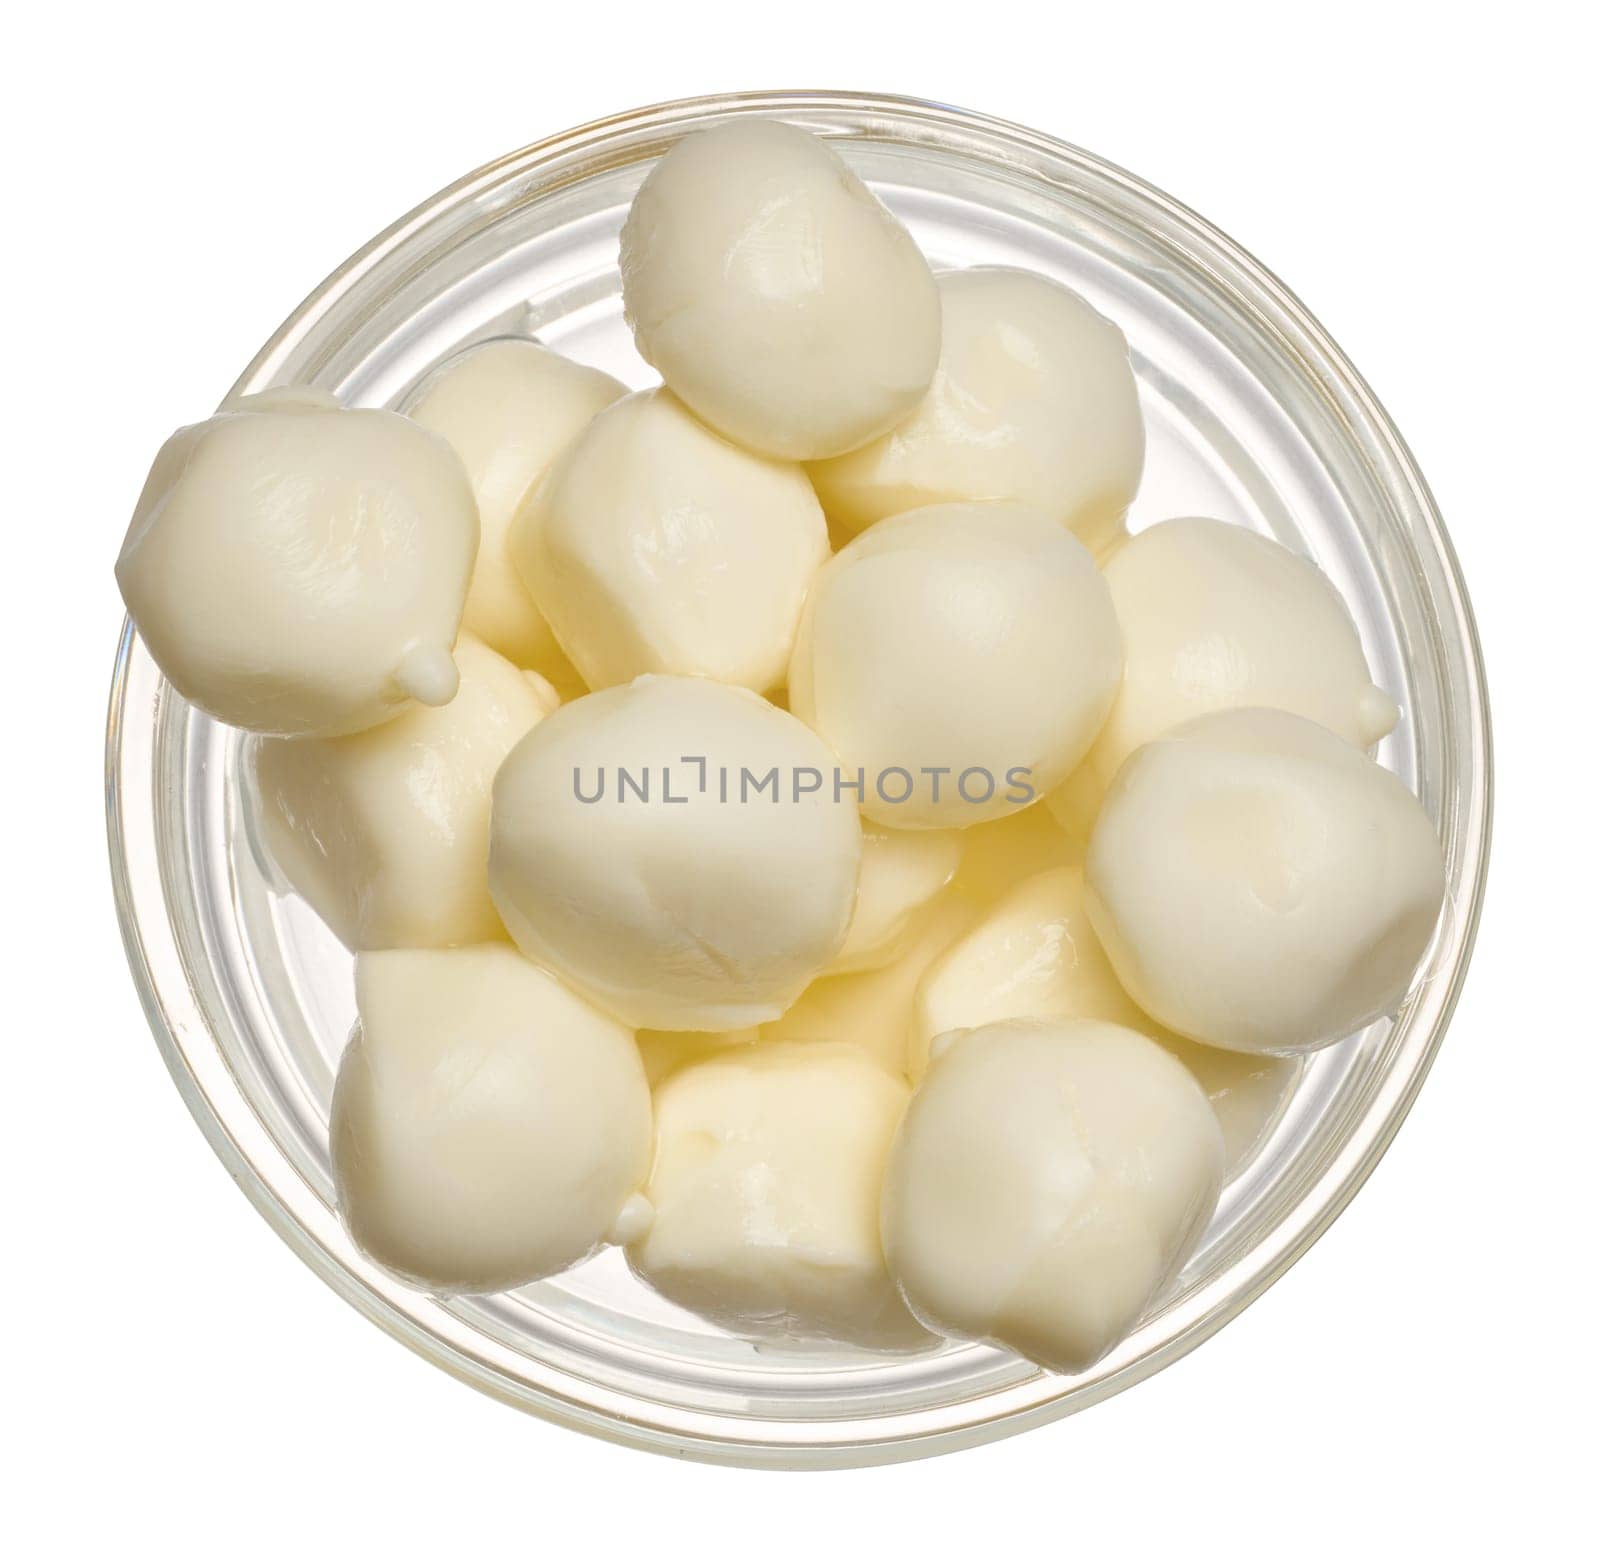 Mozzarella balls in glass bowl on isolated background by ndanko